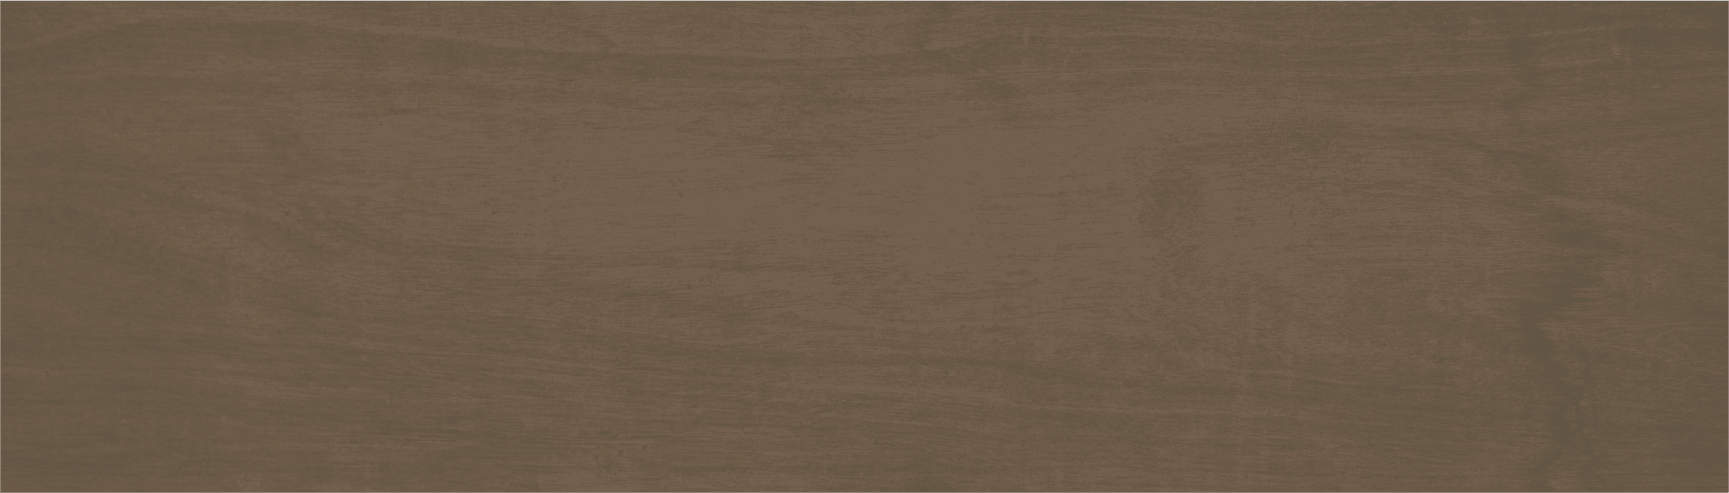 Central Location Wood Grain Background